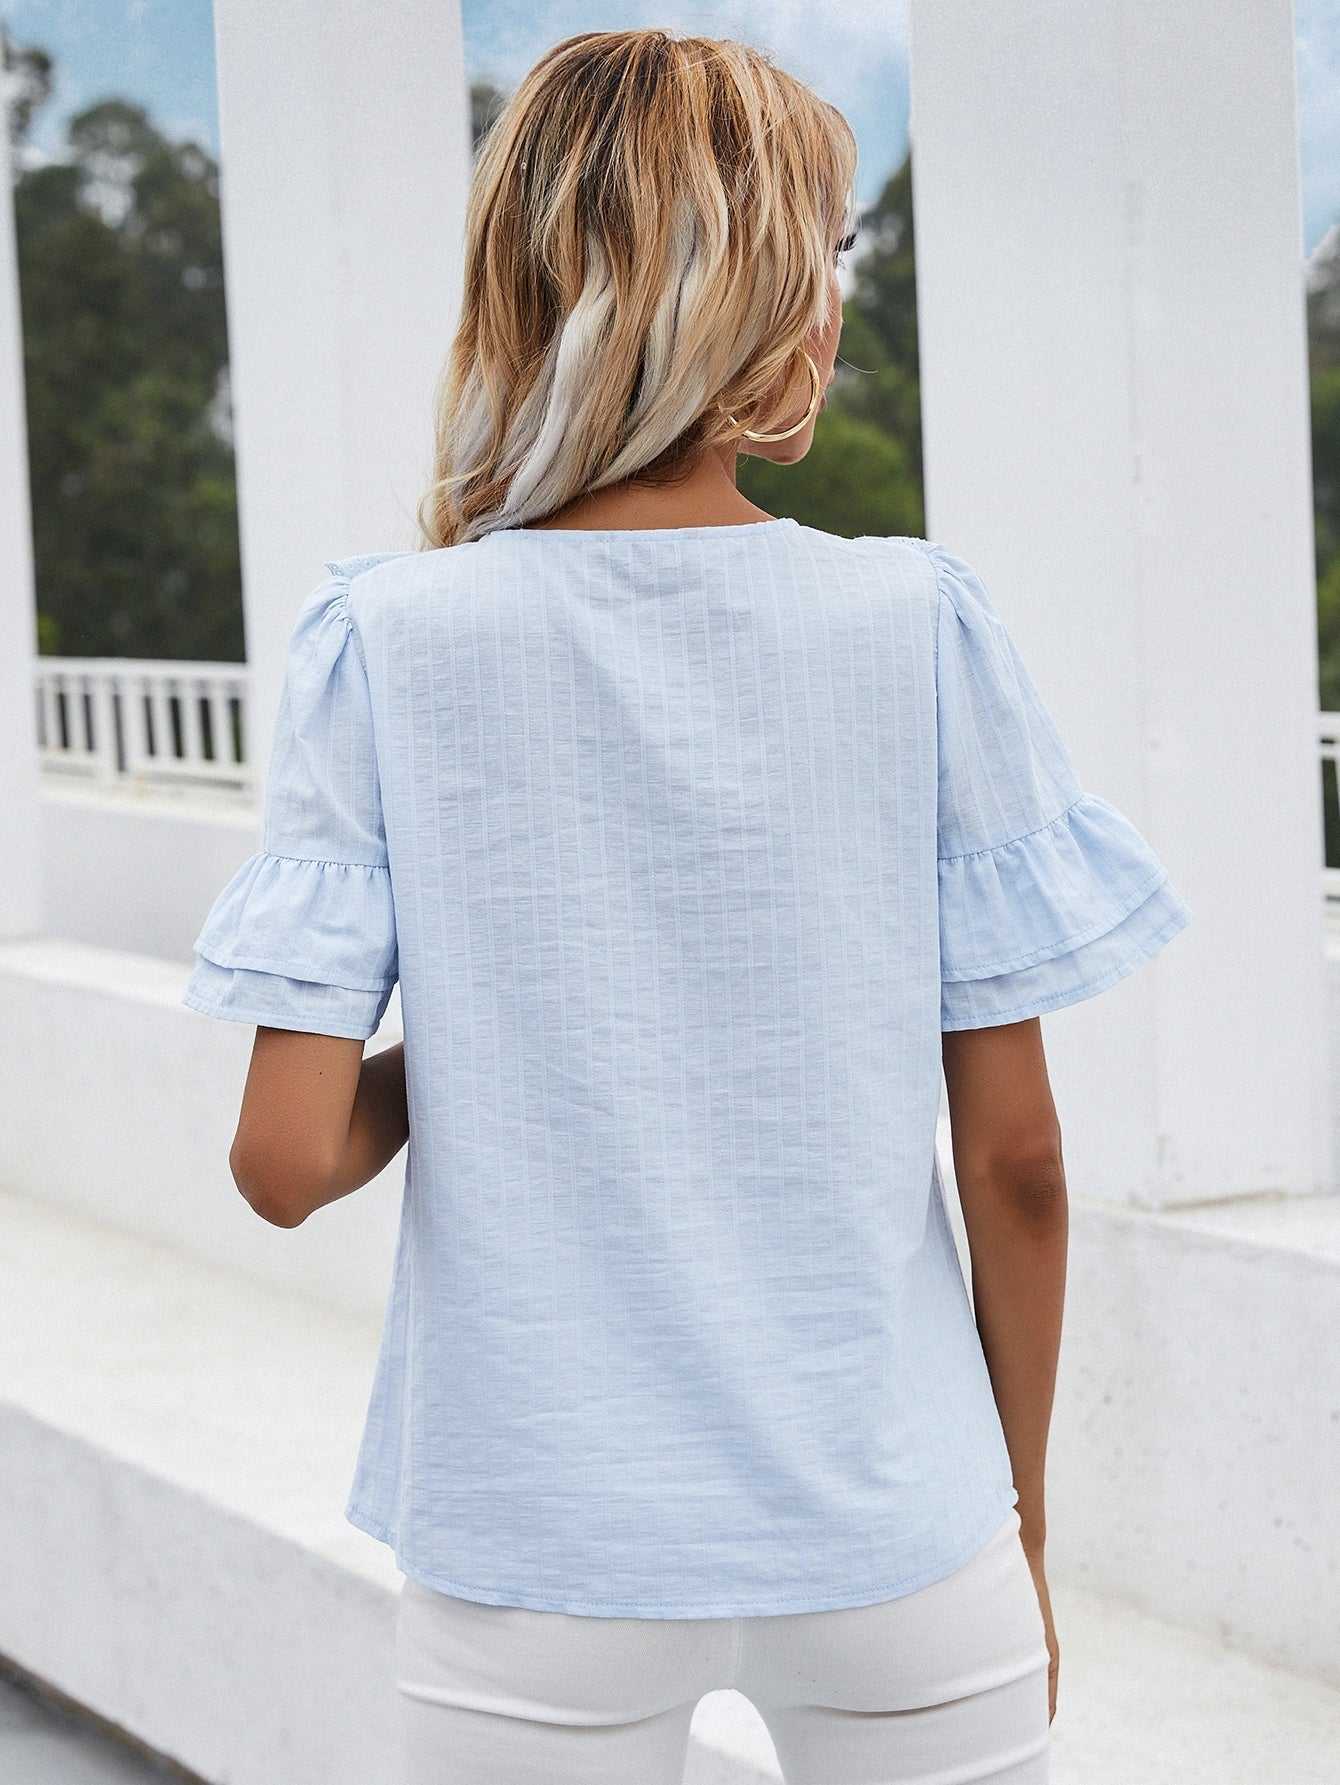 Lace hollow round neck ruffled short-sleeved shirt top Sai Feel